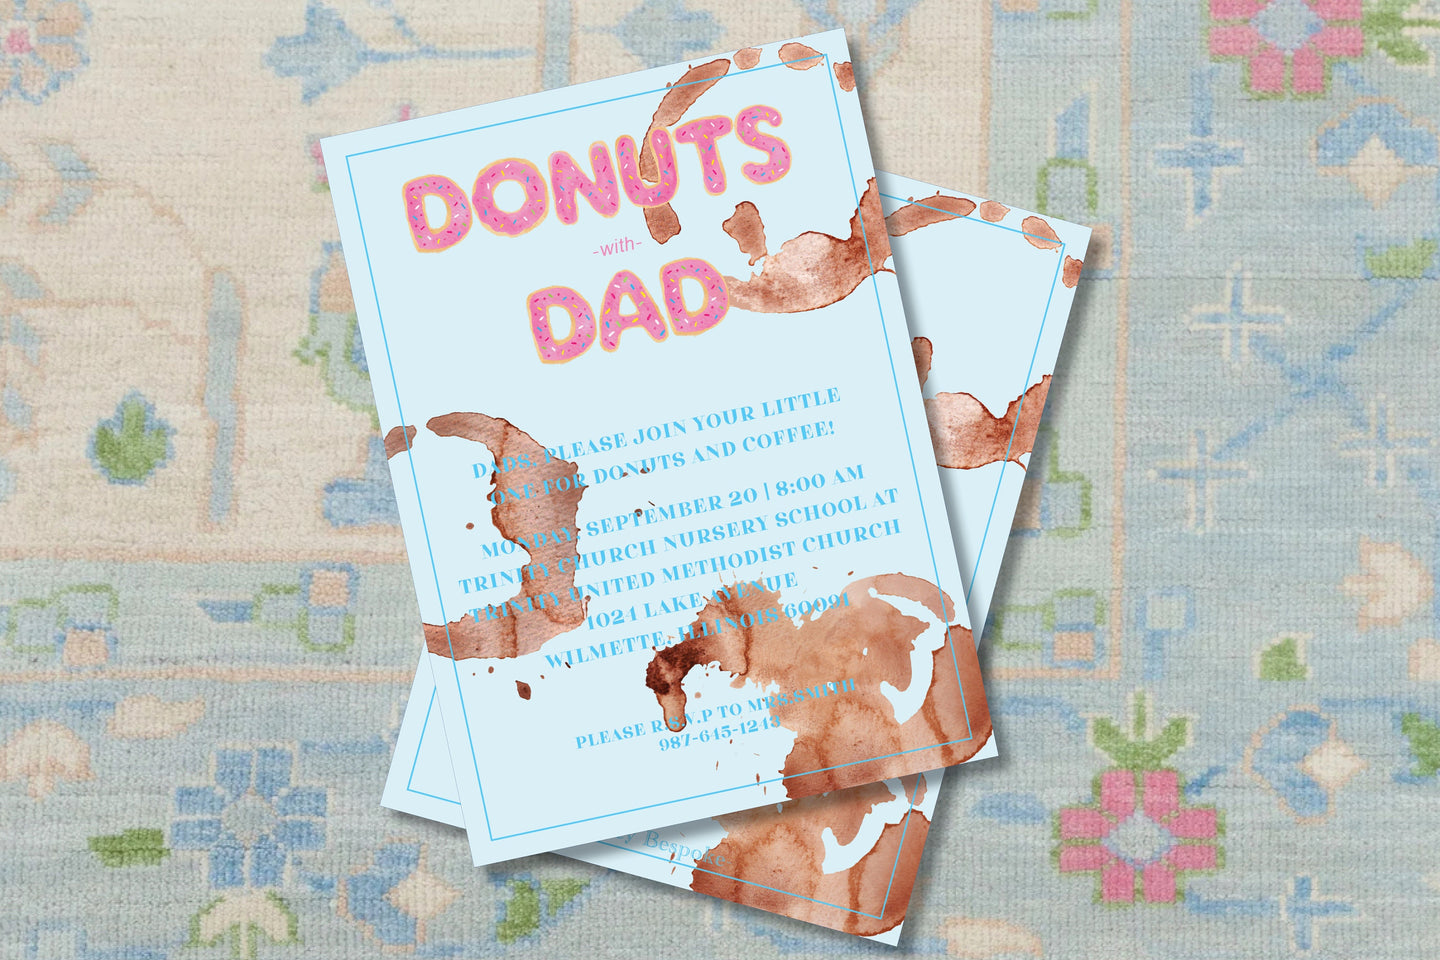 Watercolor Donut Invitation / Donuts With Dad/ Watercolor/ Donut Party/ Doughnut Invitation